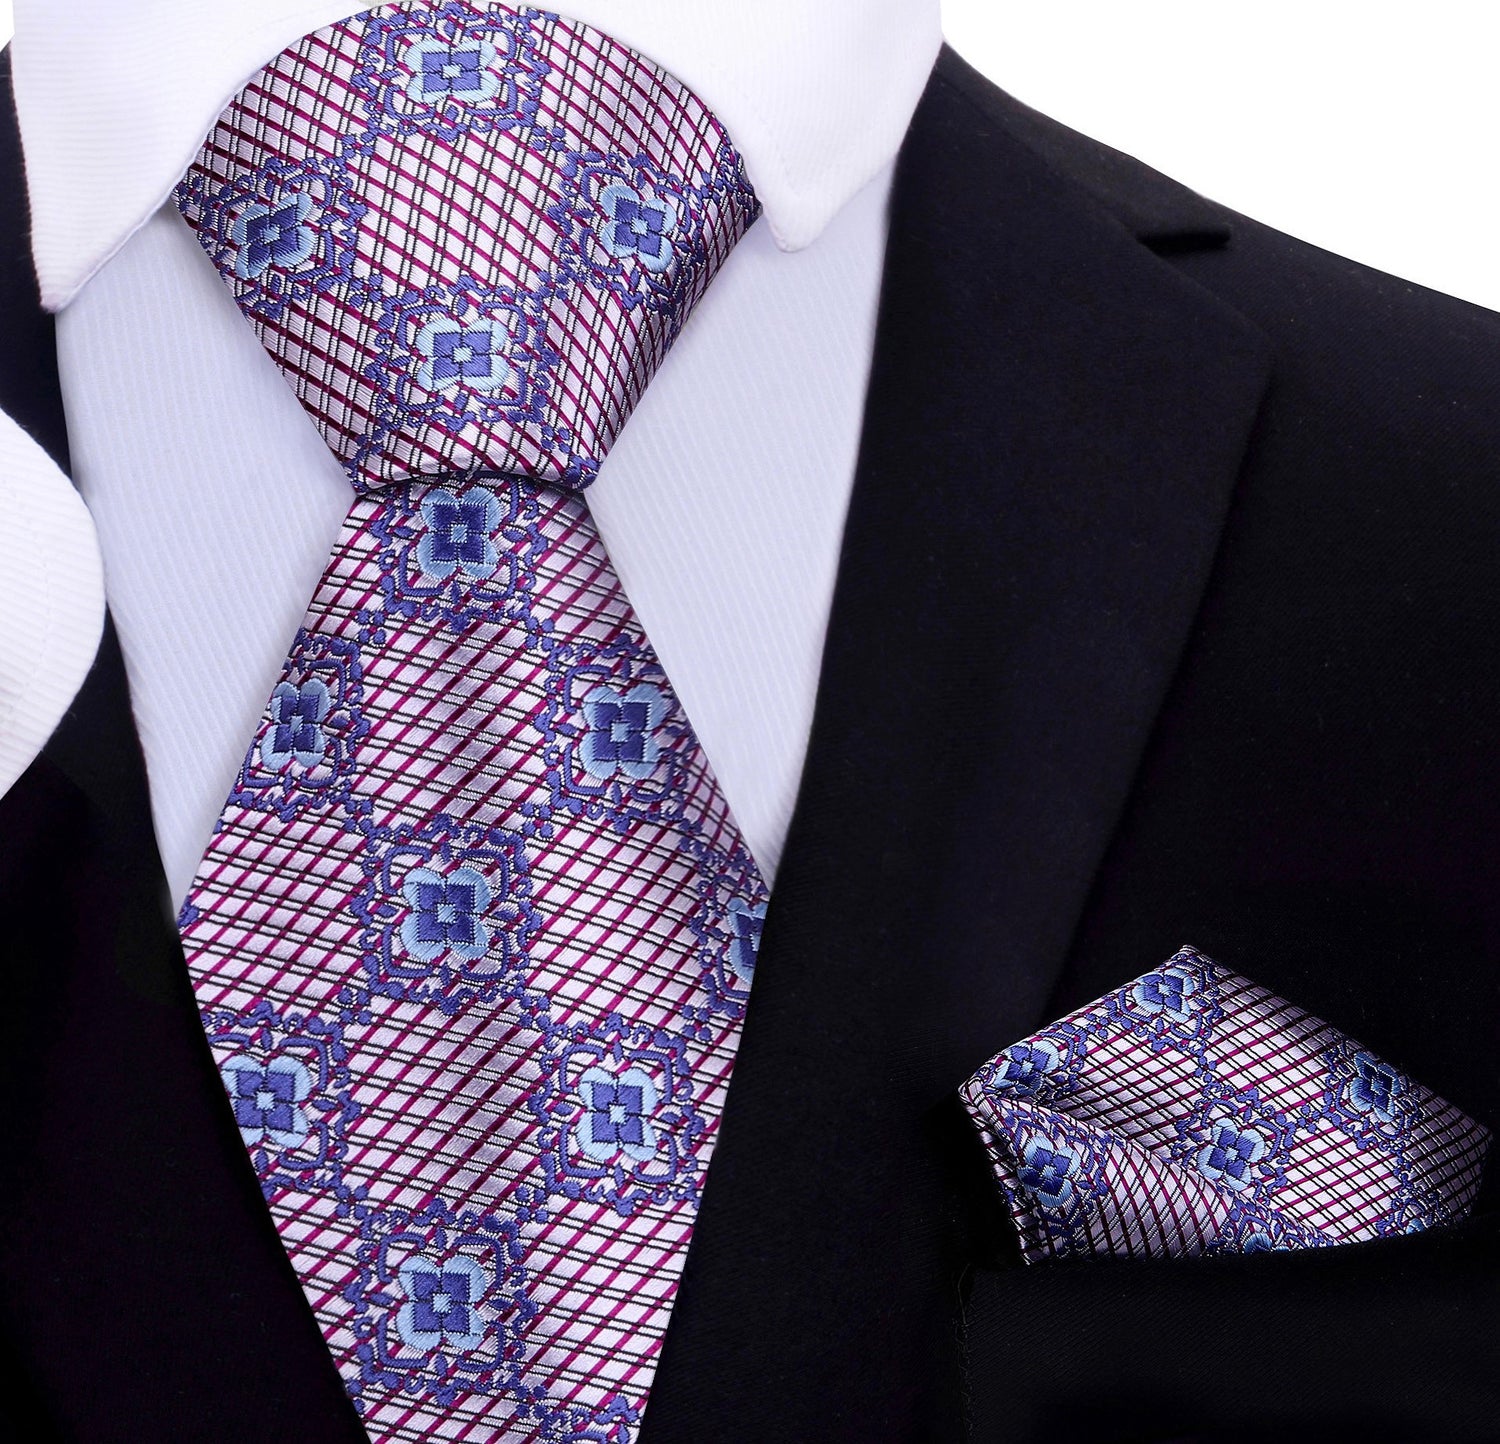 A Silver, Scarlet, Purple Geometric Background With Small Flowers Pattern Silk Necktie, Matching Pocket Square